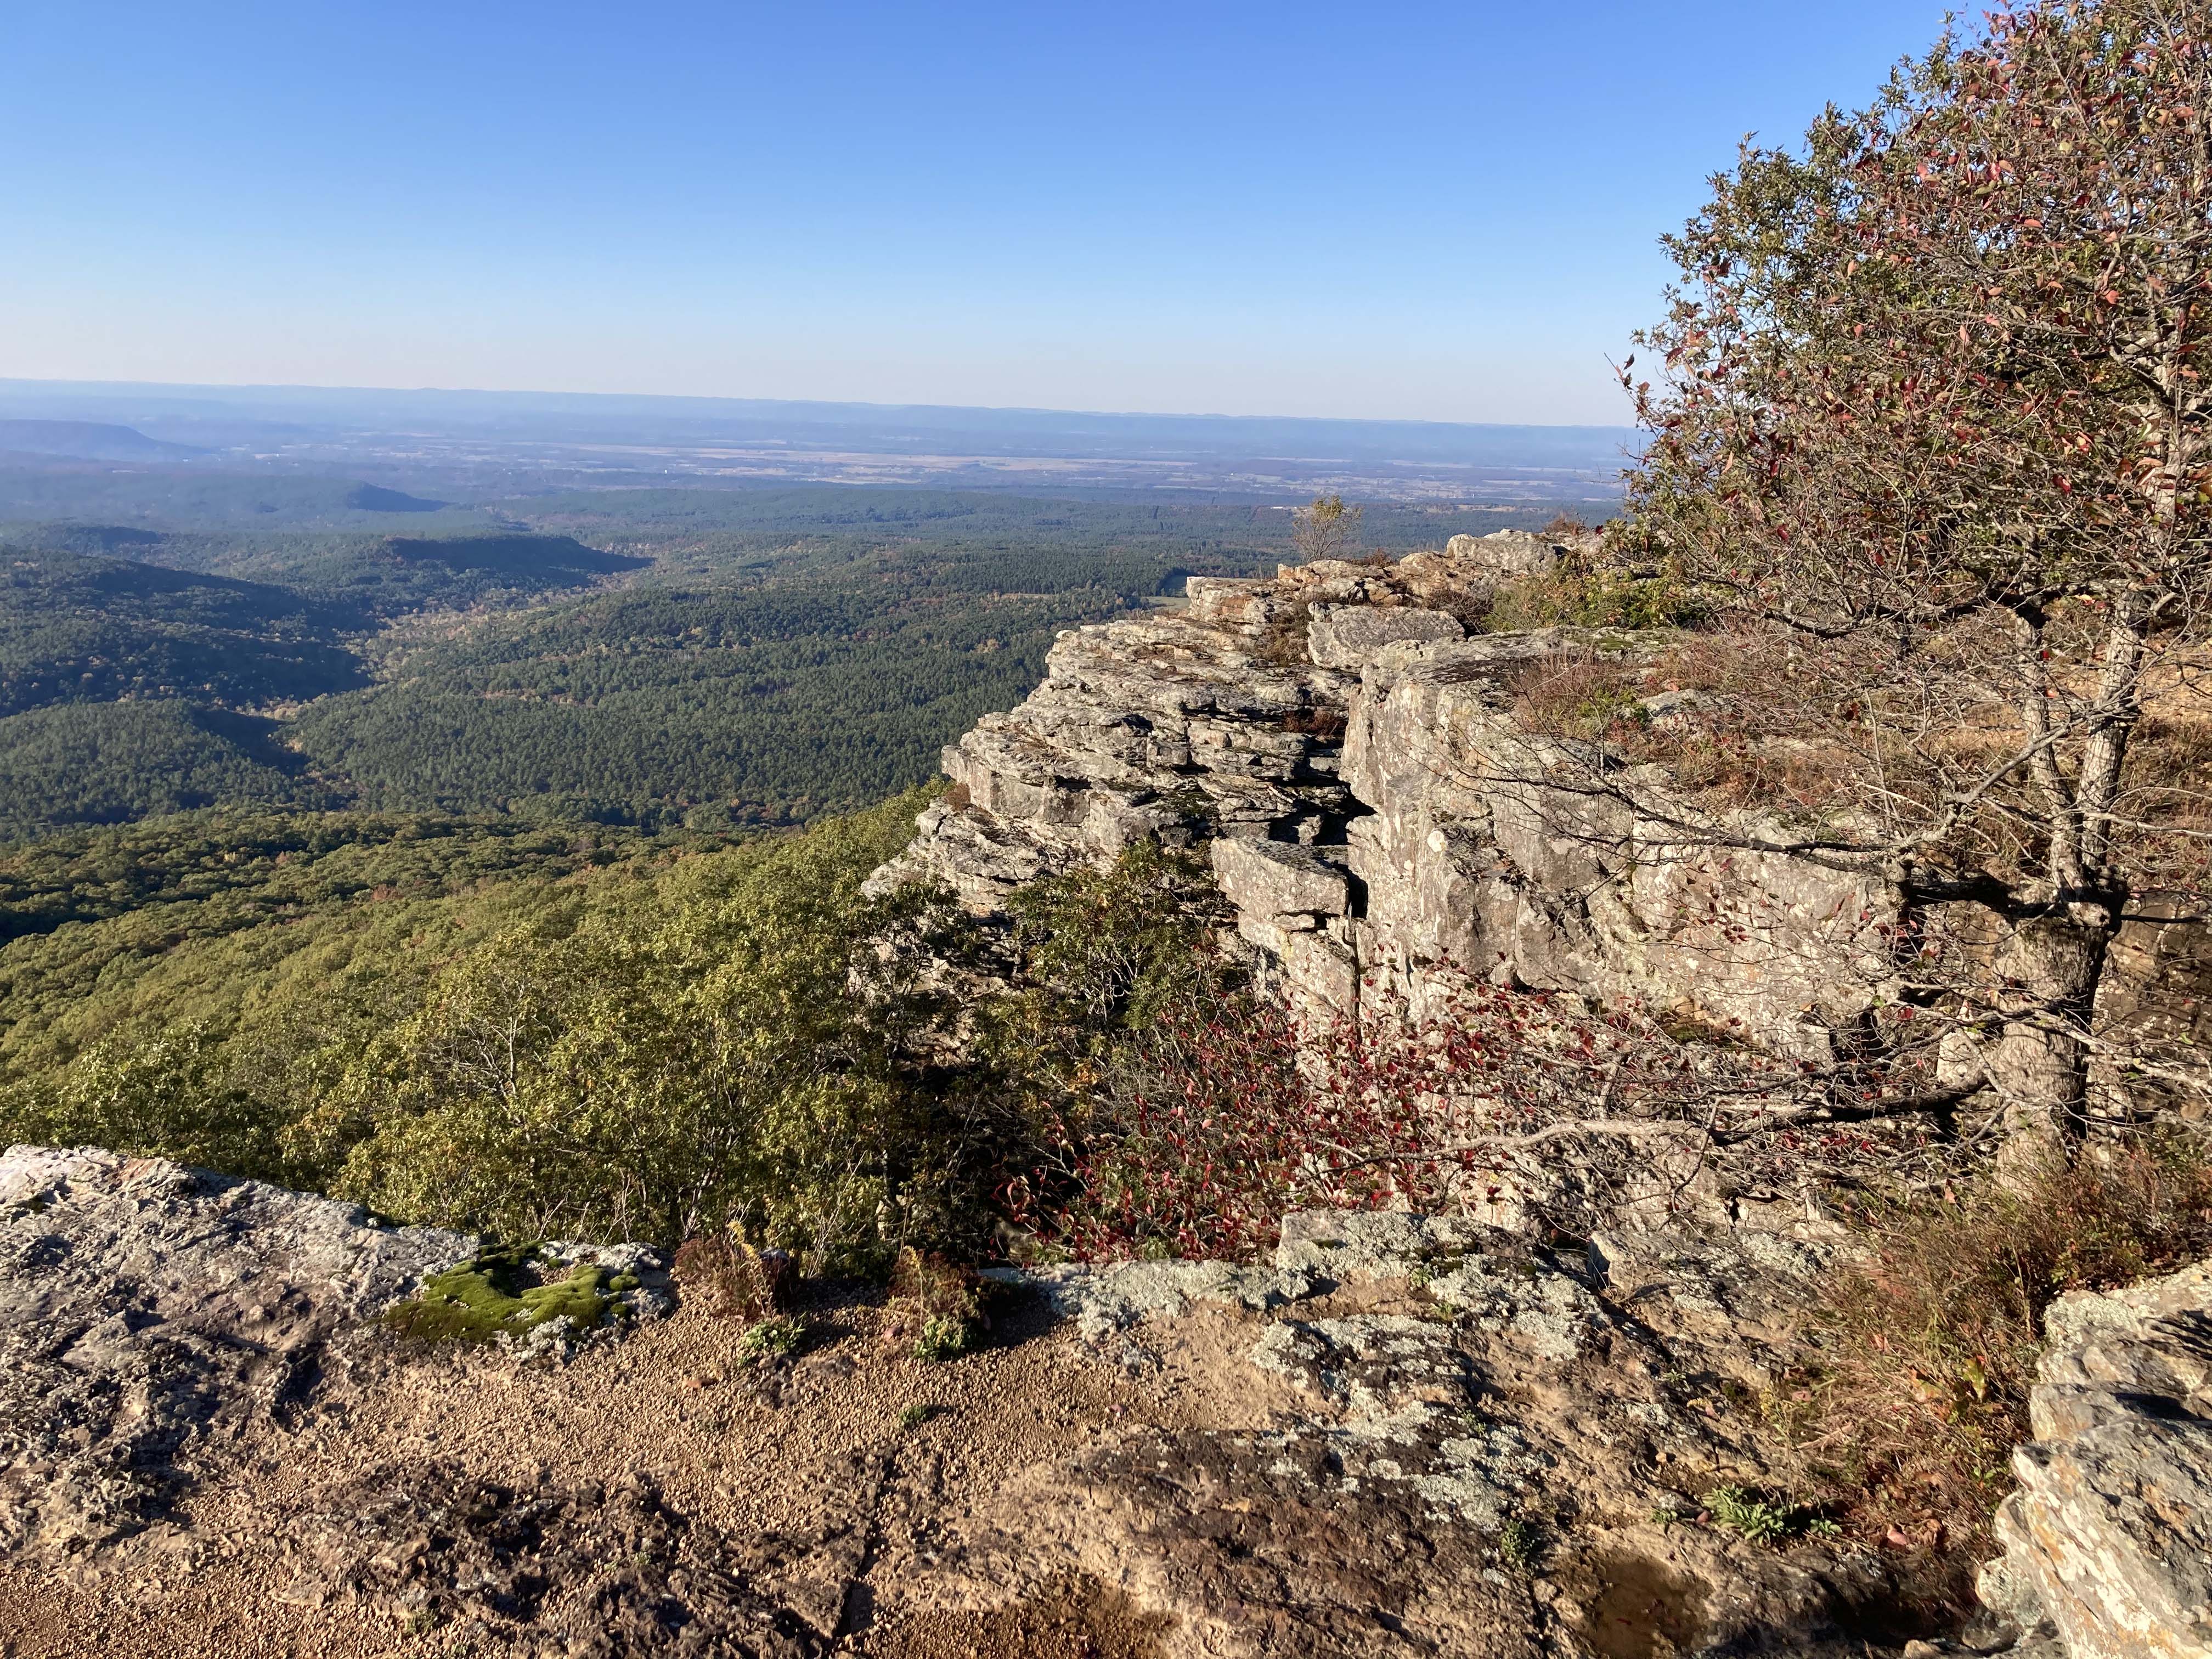 View from atop Mount Magazine